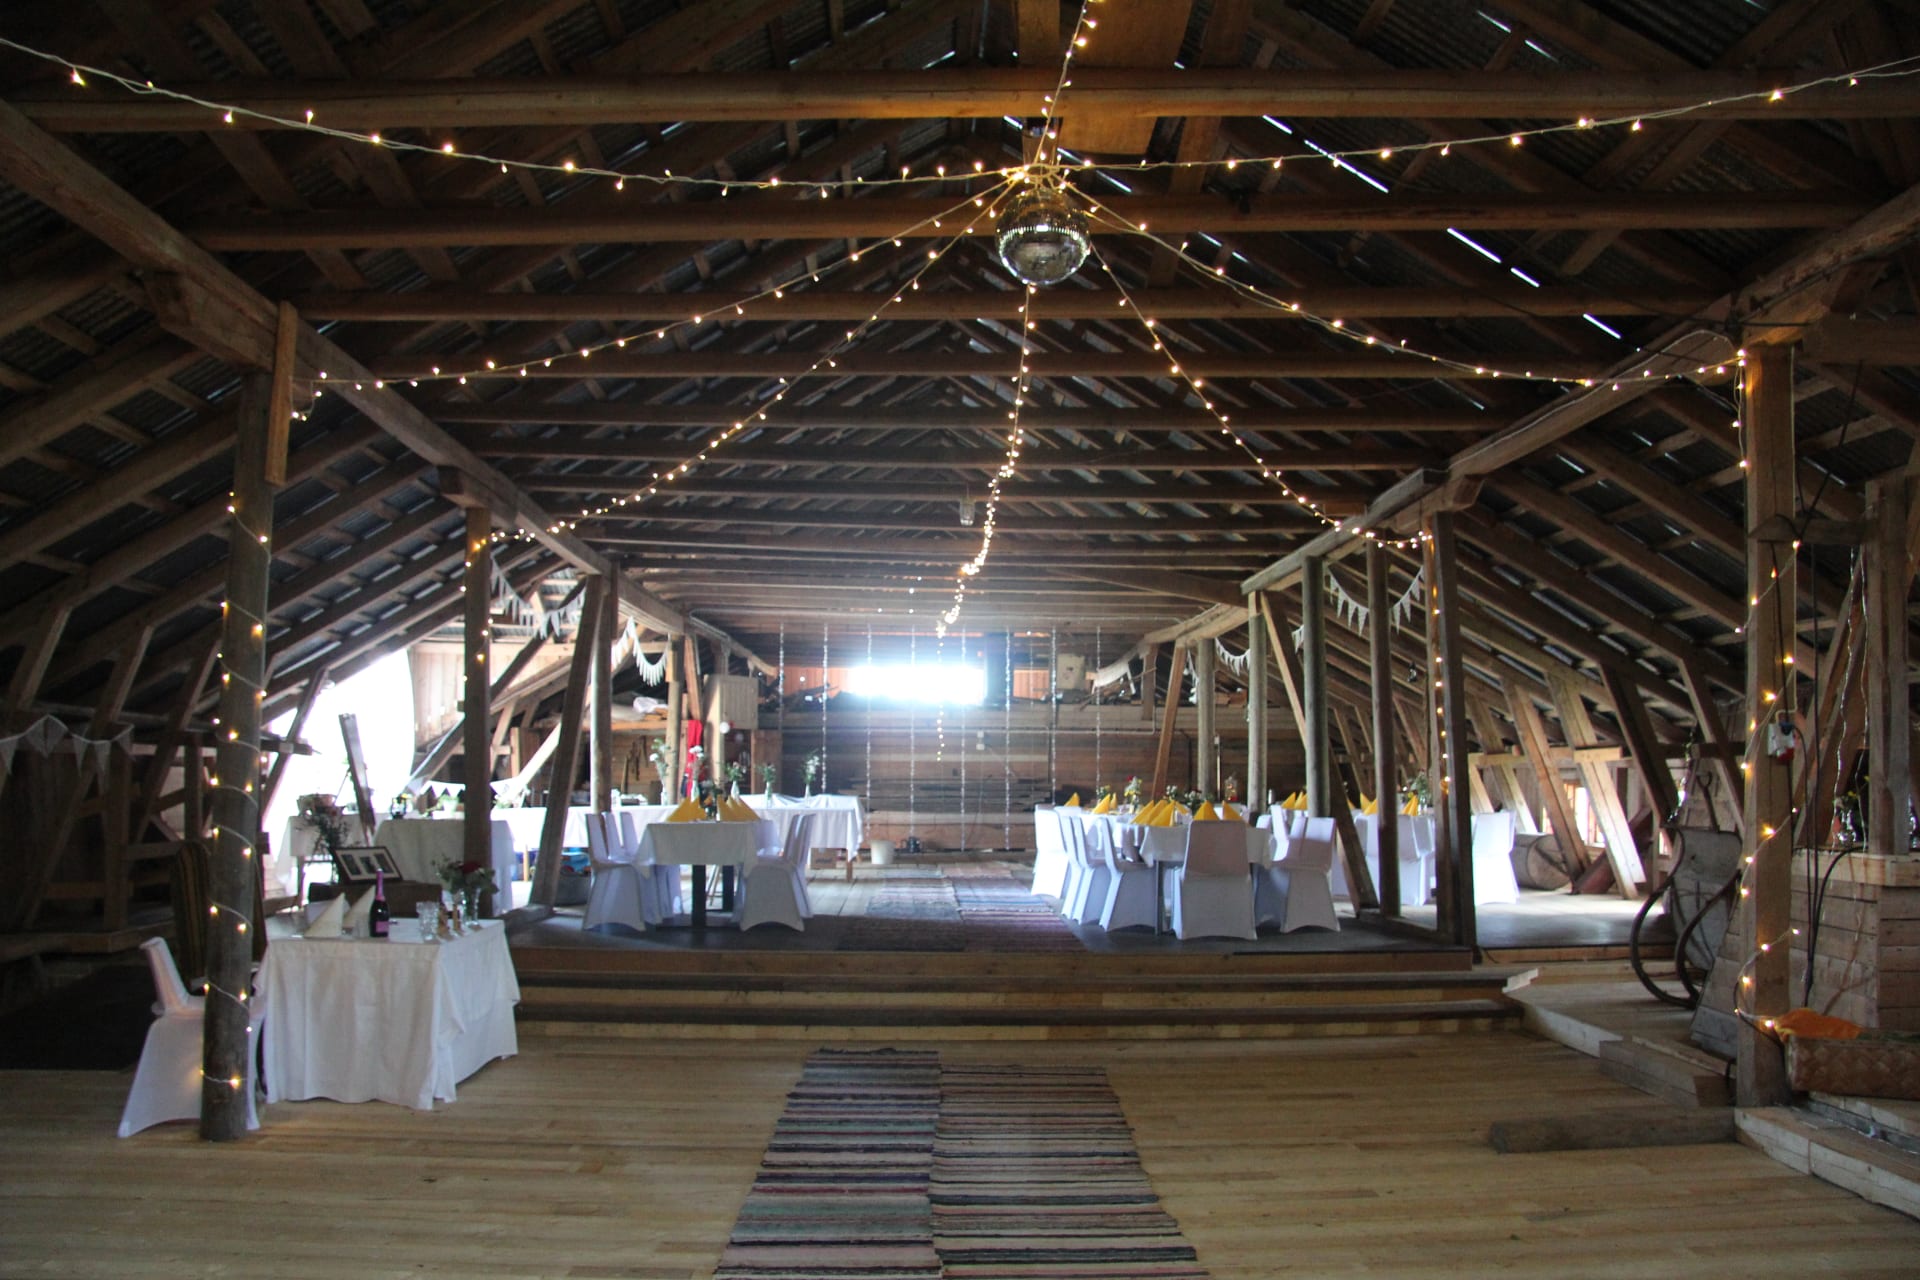 Old Cattle Barn Party Room